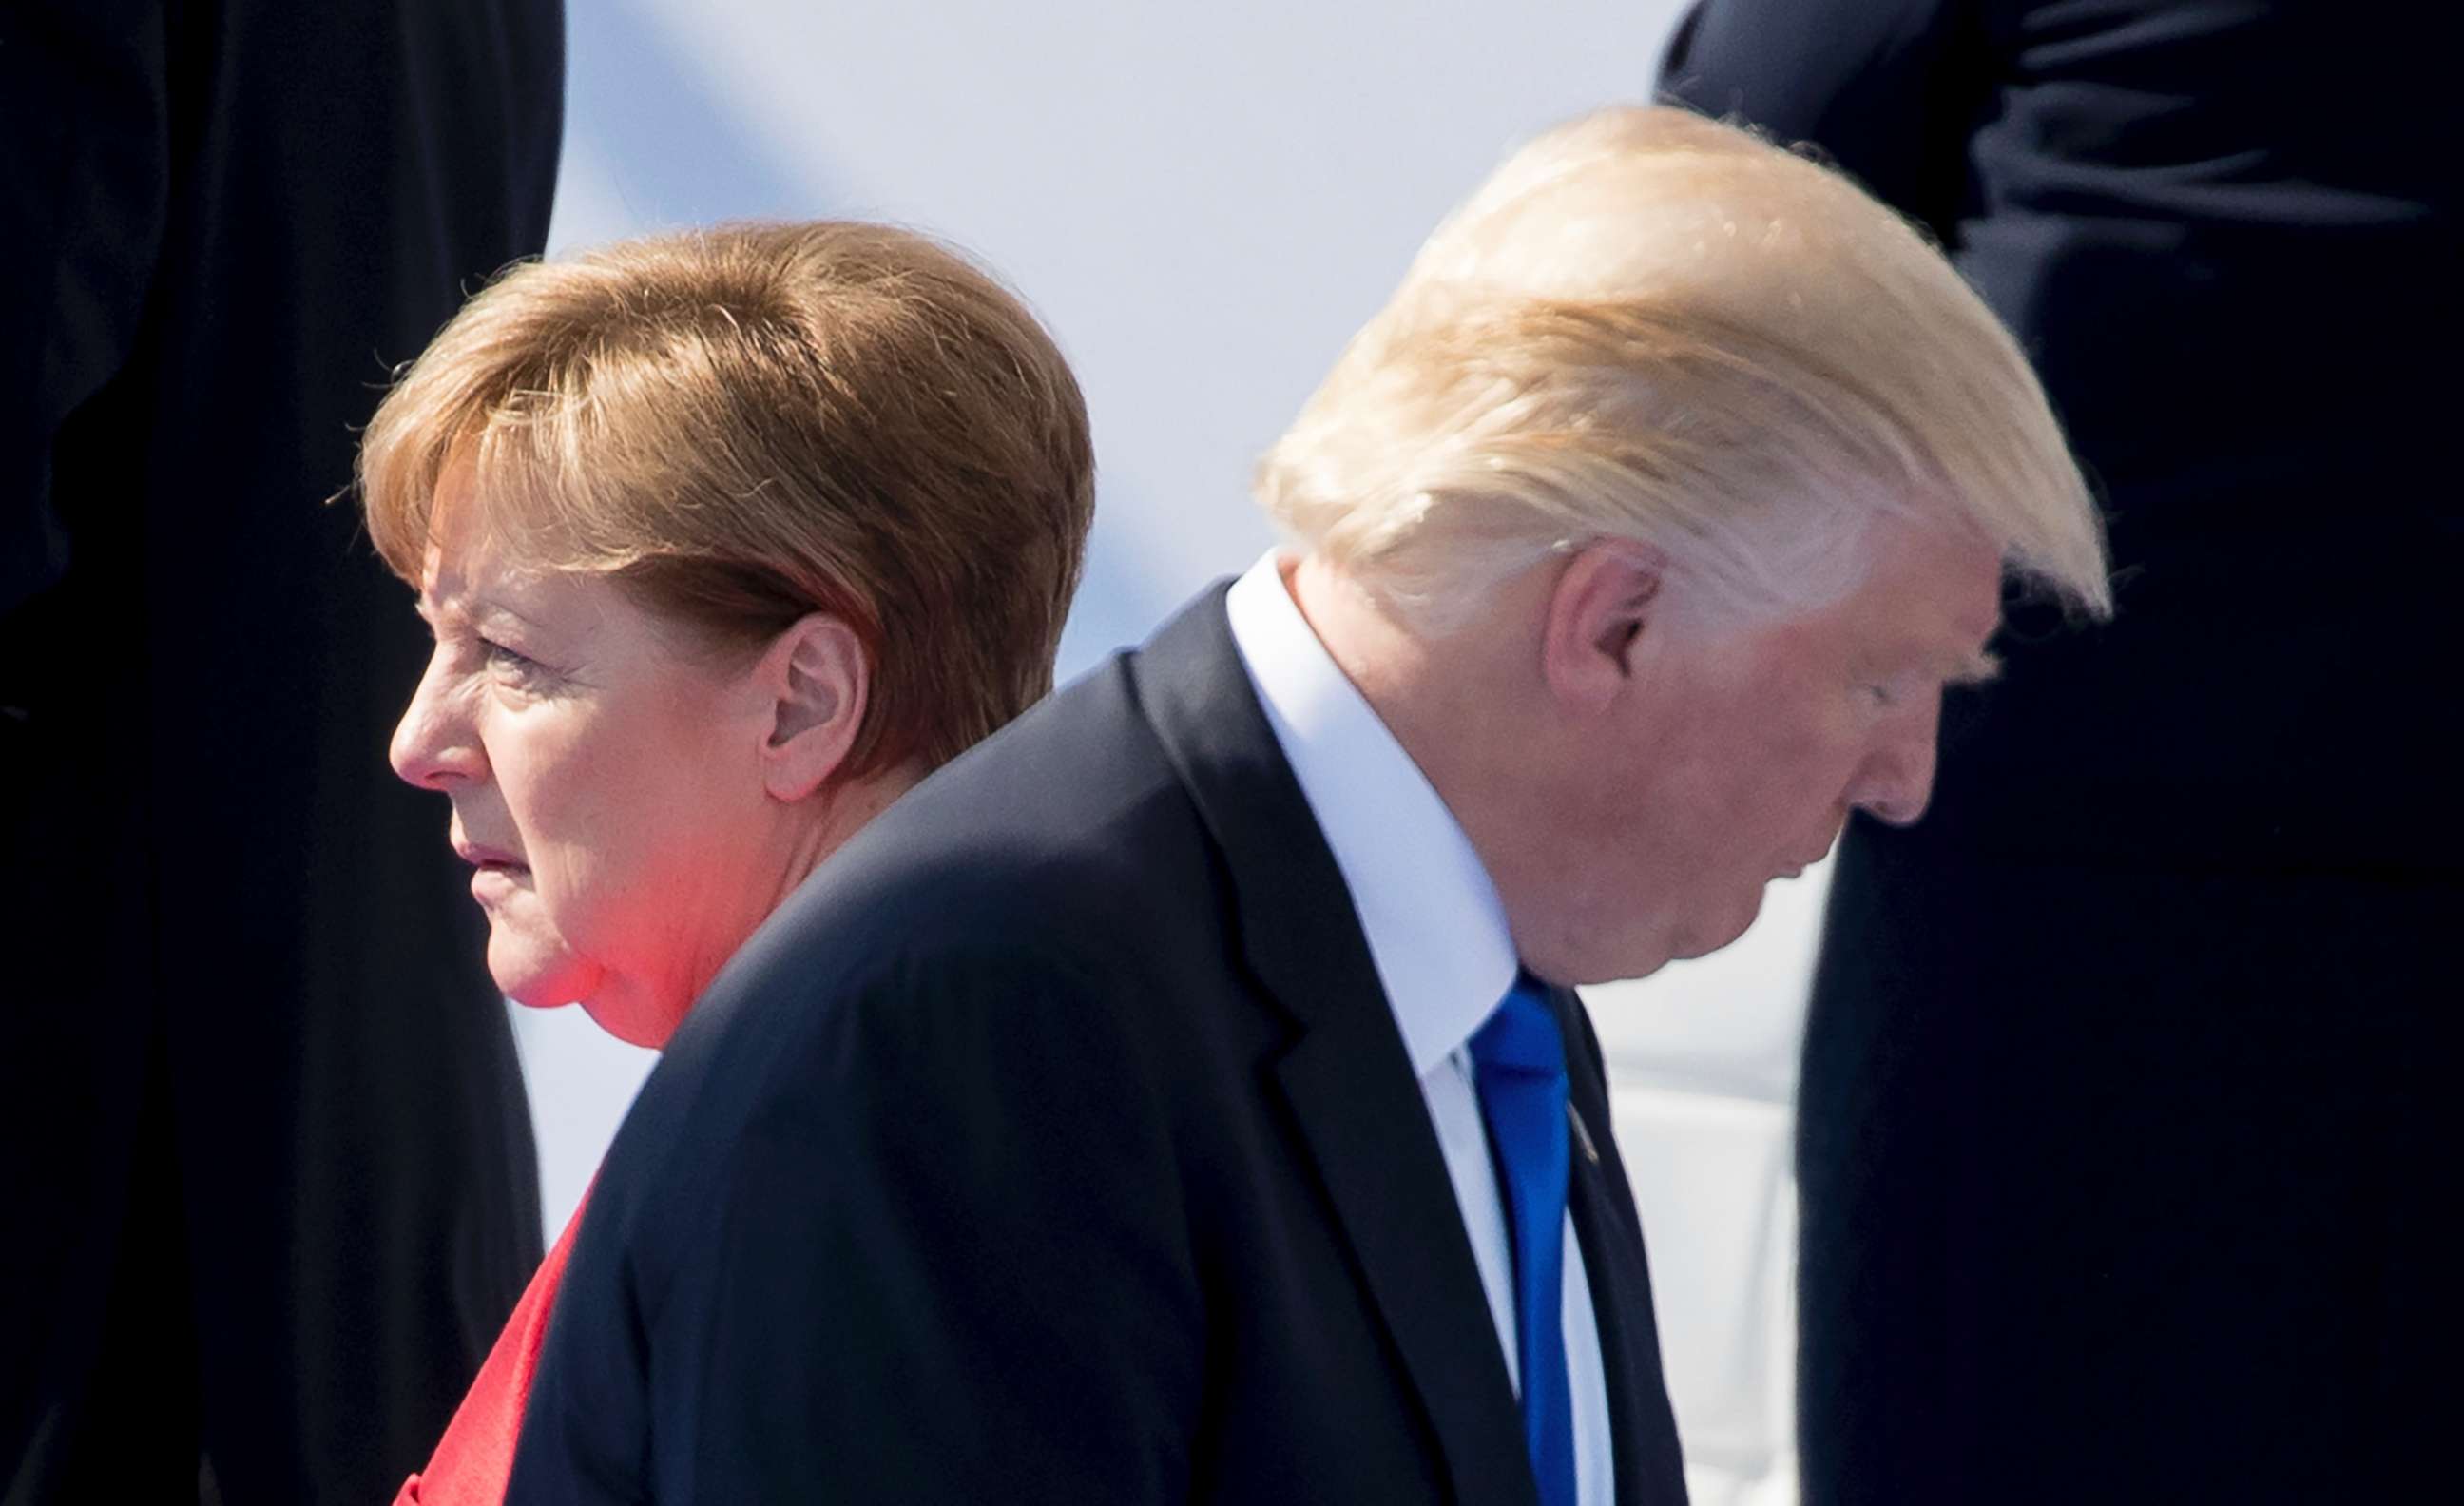 PHOTO: President Donald Trump and German chancellor Angela Merkel walk by each other during the NATO summit for the formal inauguration of the NATO headquarters in Brussels, May 25, 2017.